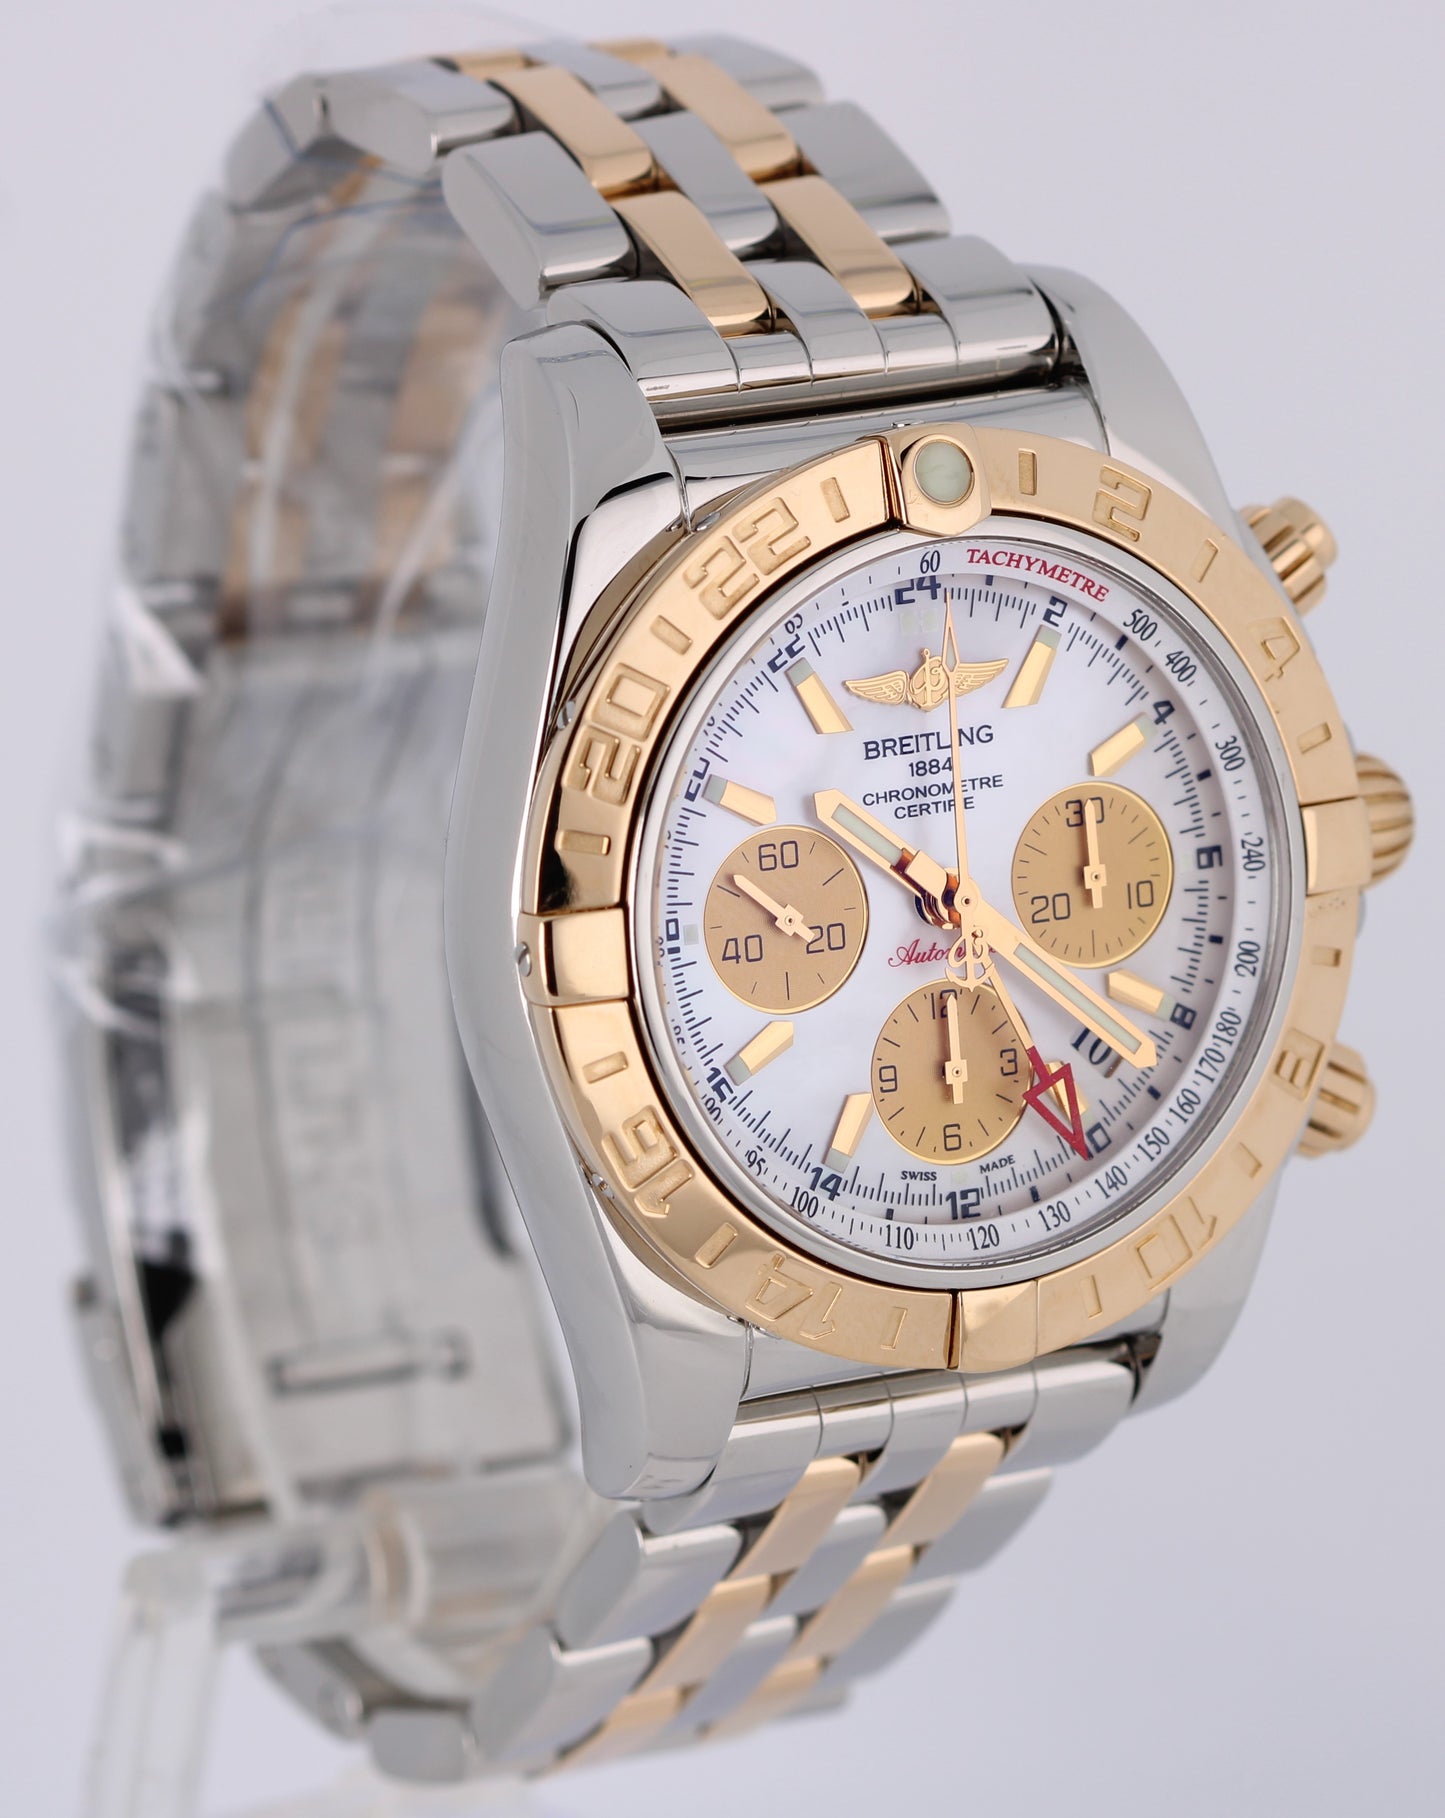 Breitling Chronomat 44 GMT Two-Tone 18k Gold Mother of Pearl 44mm CB0420 Watch